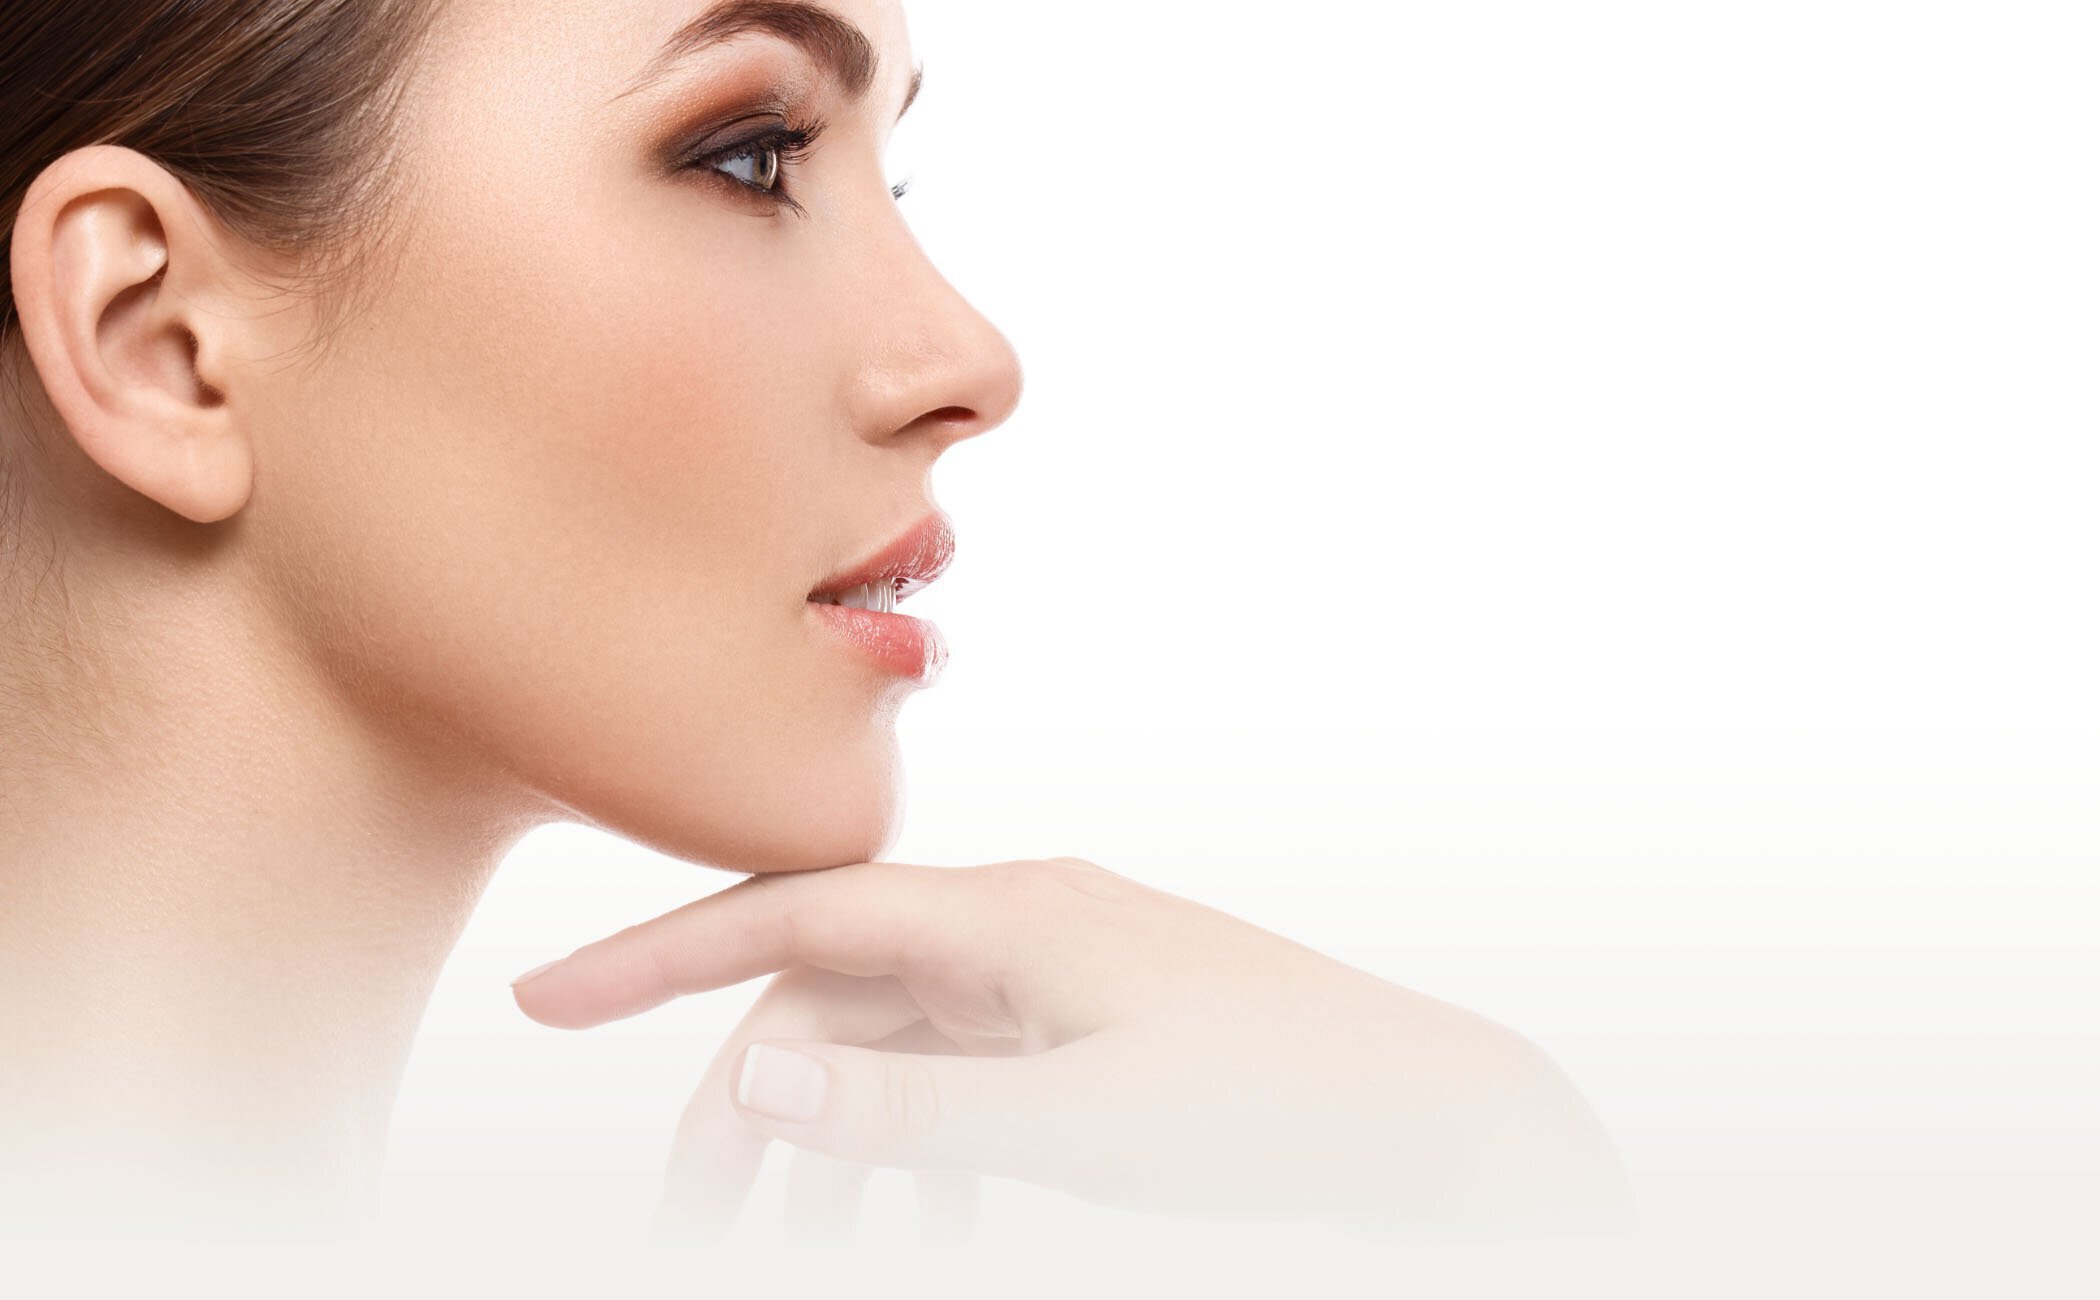 What is Kybella?